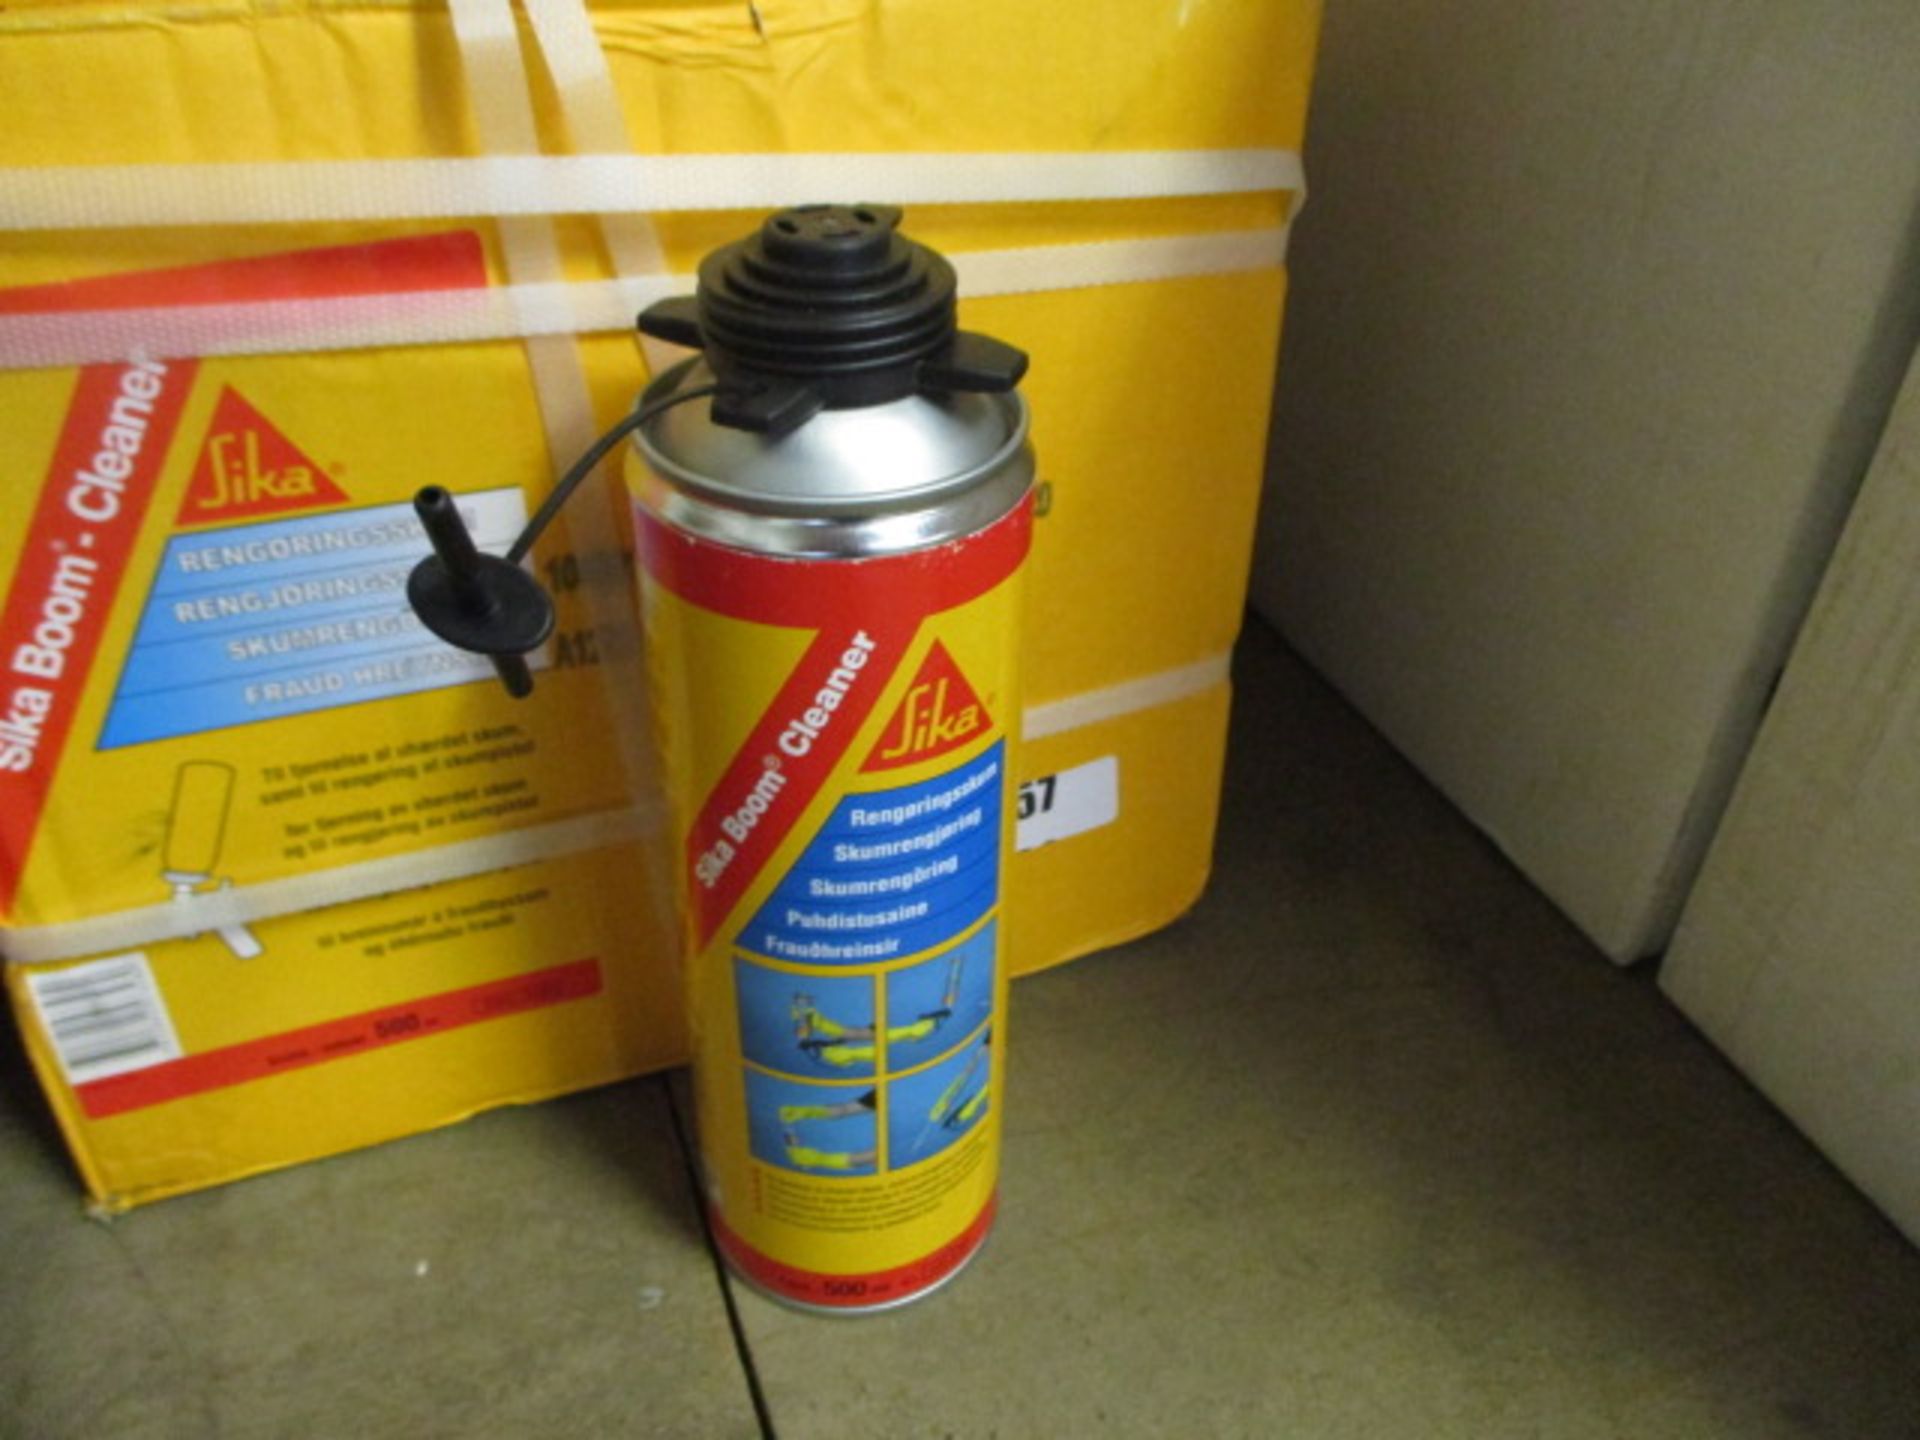 Box of Sika cleaner - Image 2 of 2